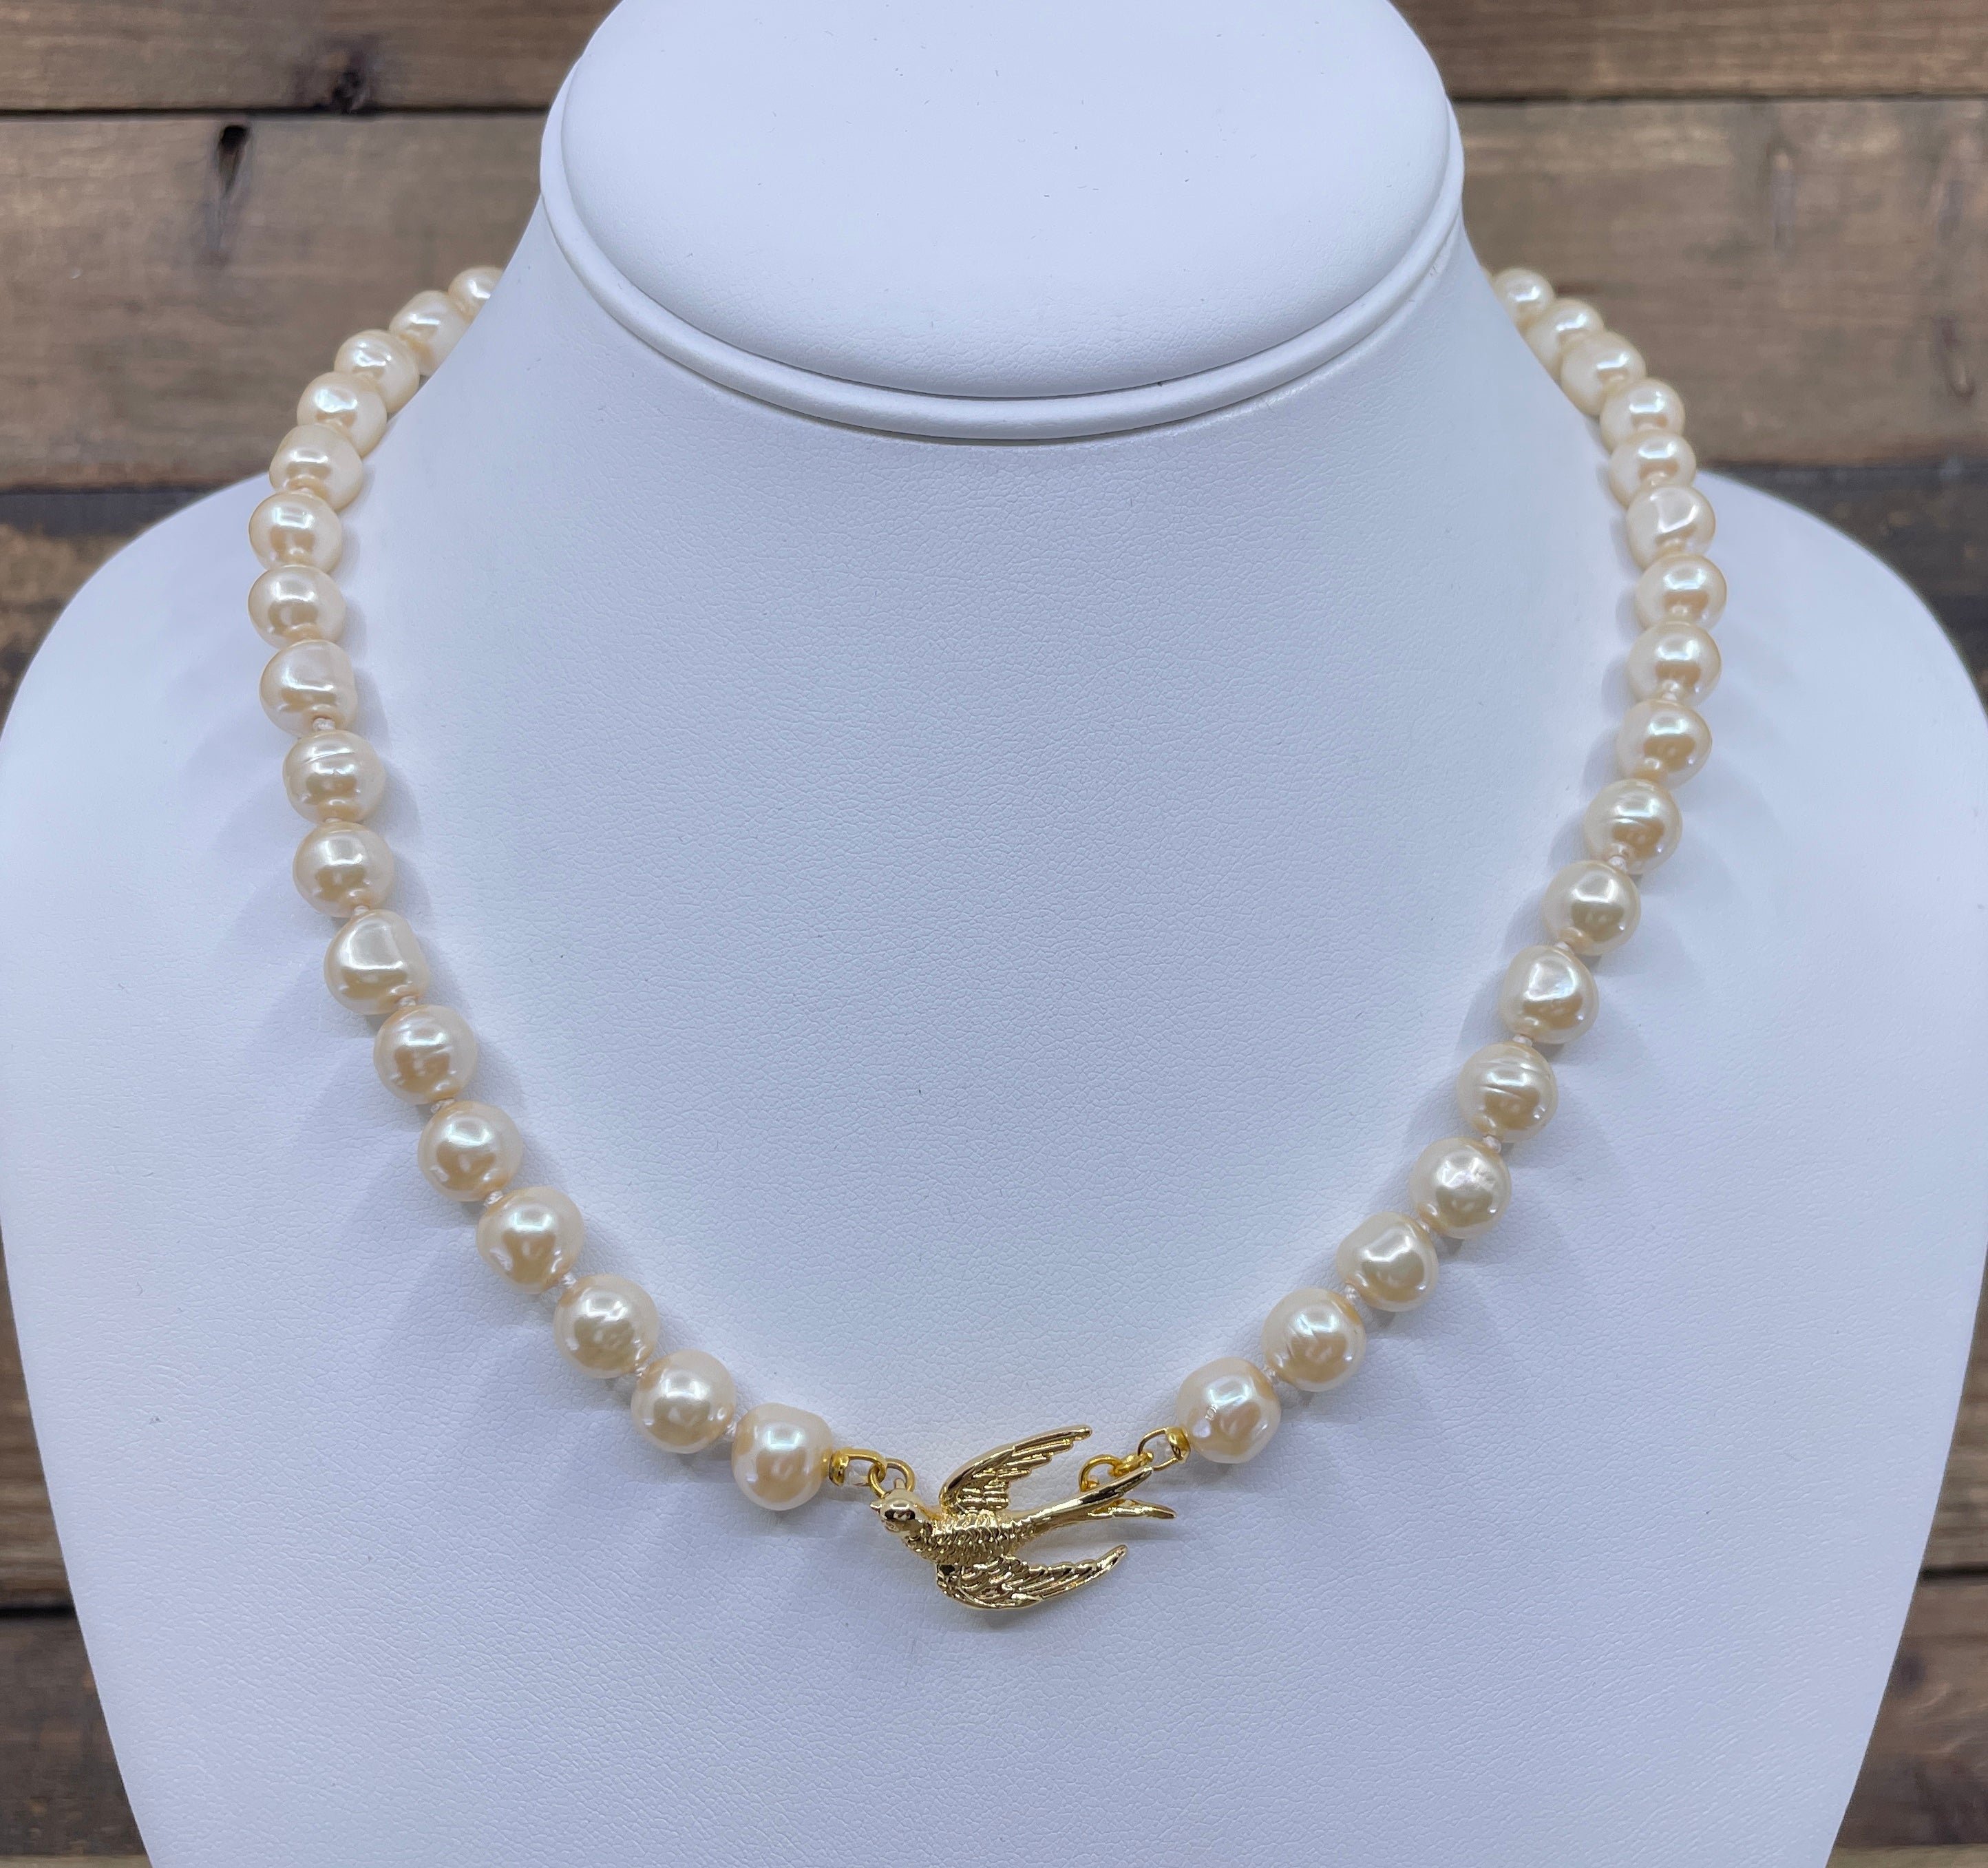 Vintage Pearl Necklace with Gold Plated Bird